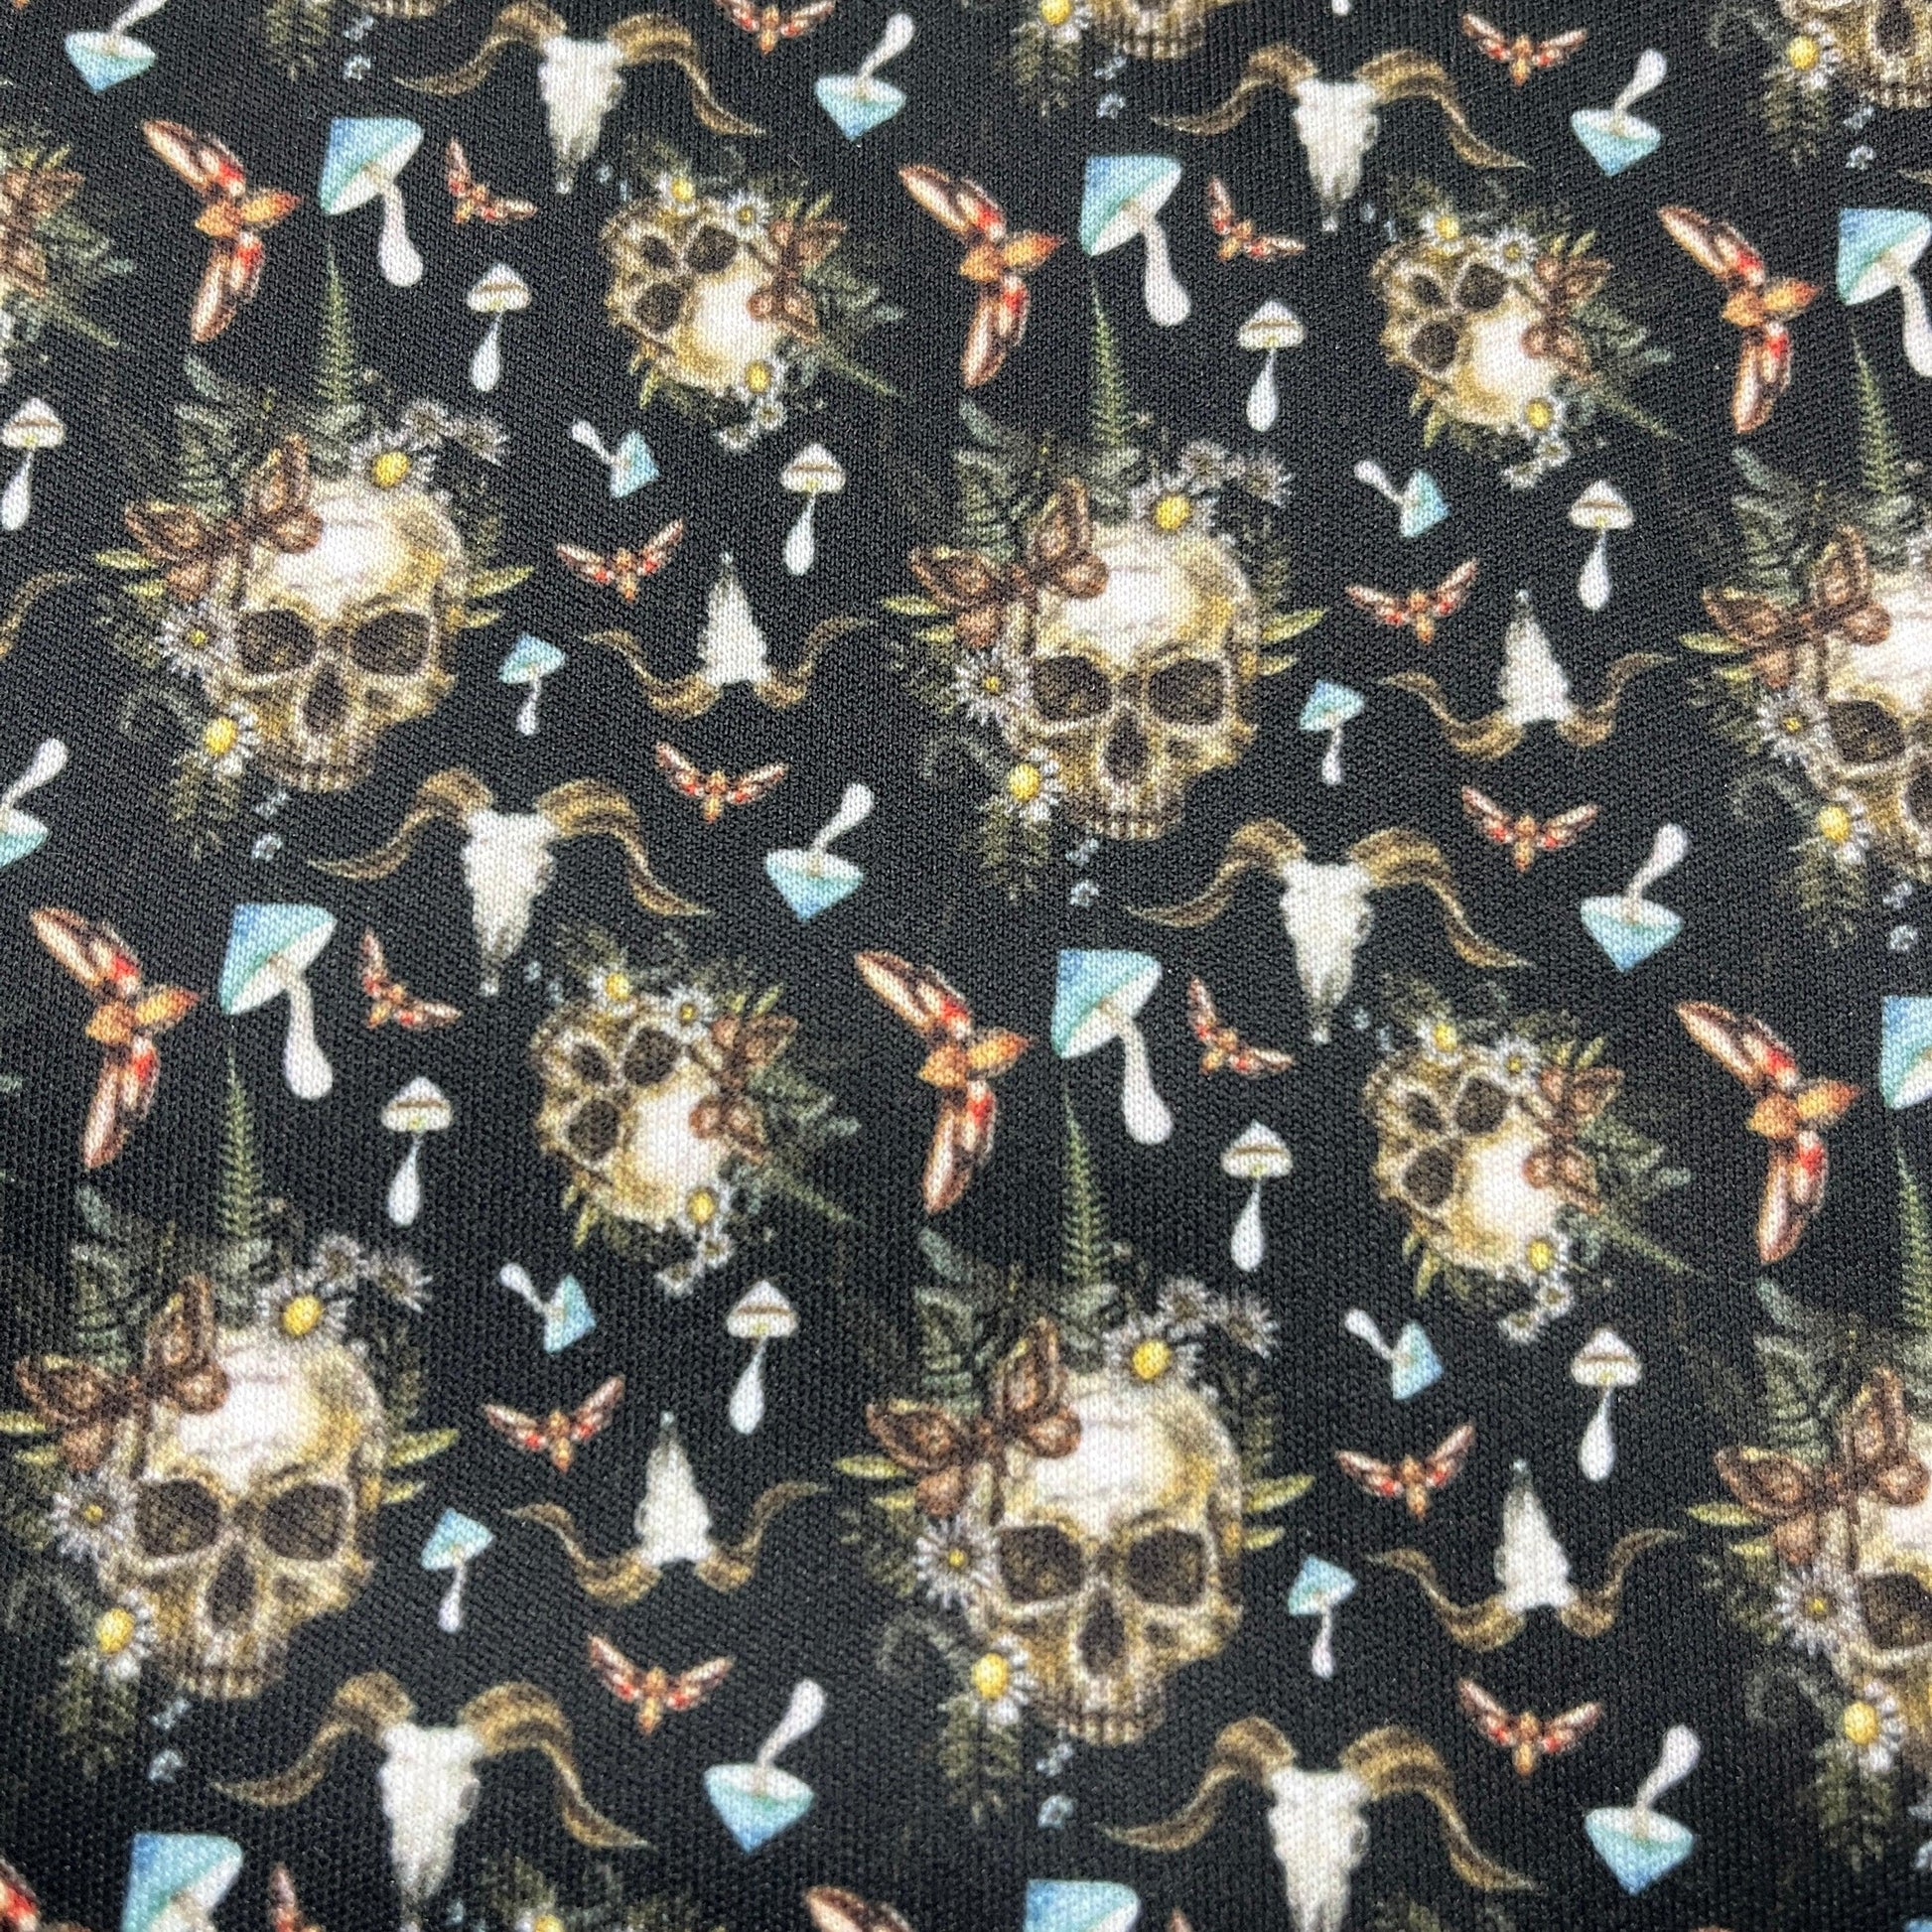 Skull Forest 1 mil PUL Fabric - Made in the USA - Nature's Fabrics